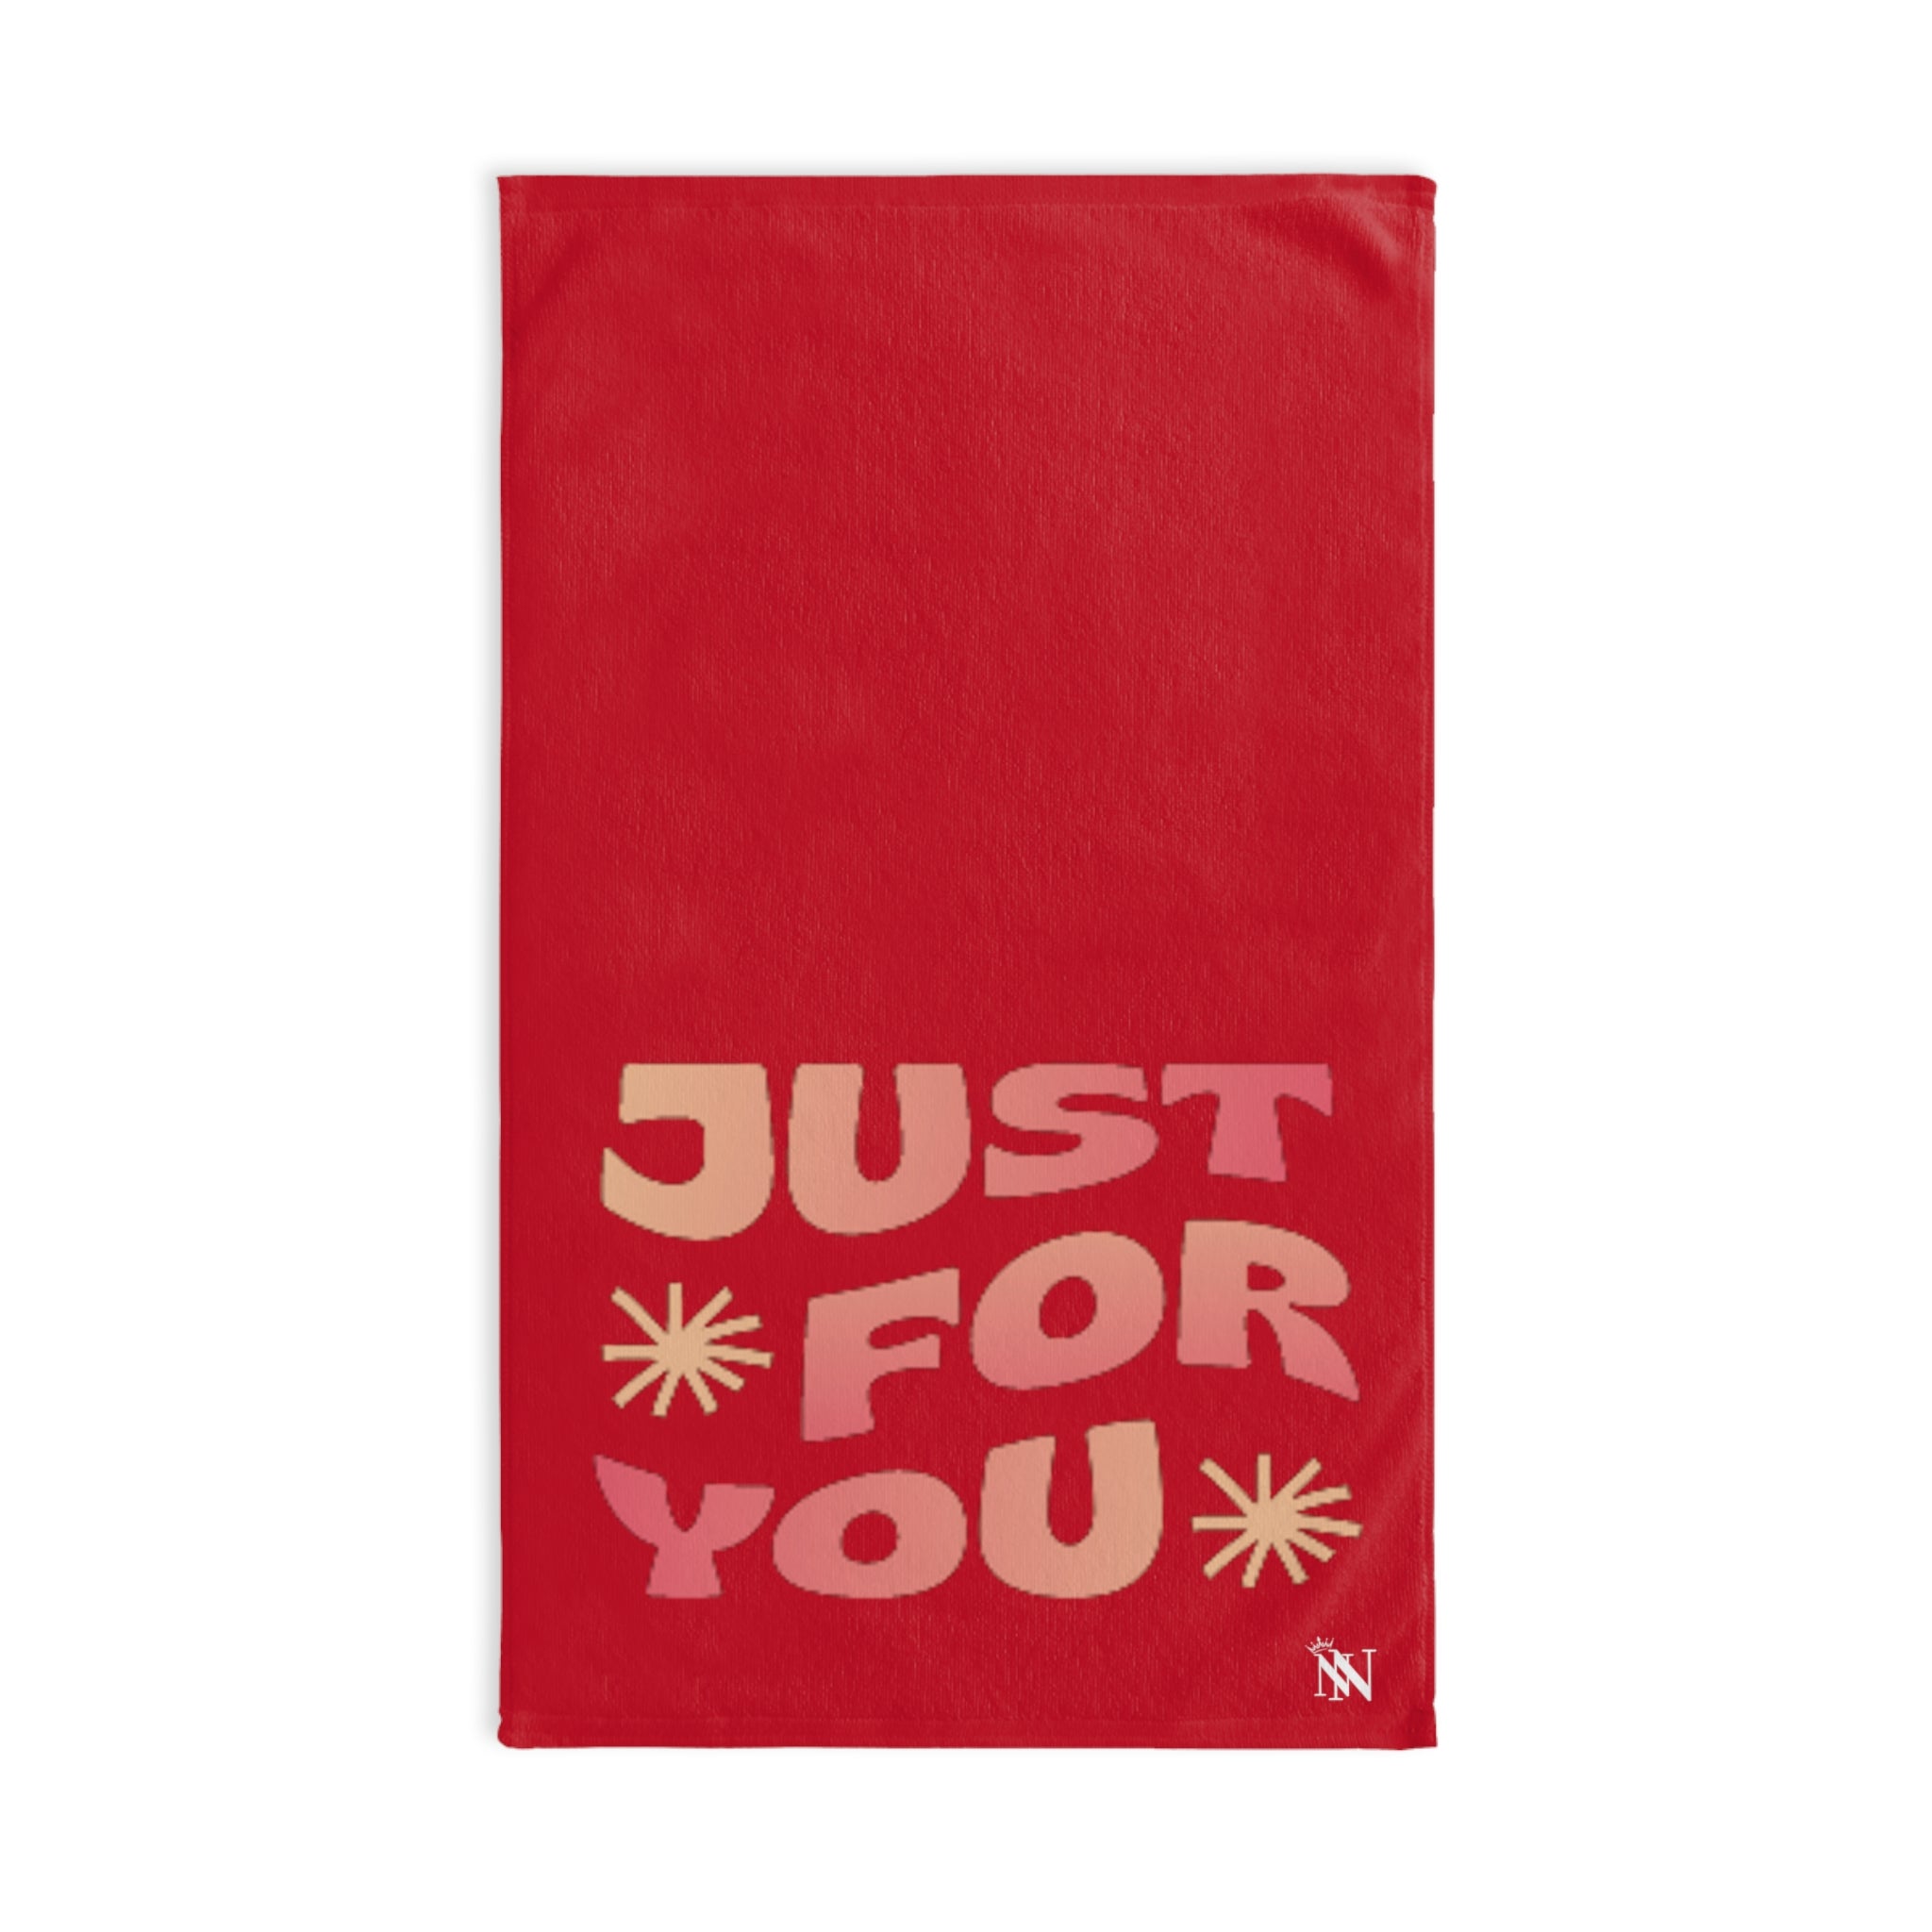 Just For You Red | Sexy Gifts for Boyfriend, Funny Towel Romantic Gift for Wedding Couple Fiance First Year 2nd Anniversary Valentines, Party Gag Gifts, Joke Humor Cloth for Husband Men BF NECTAR NAPKINS